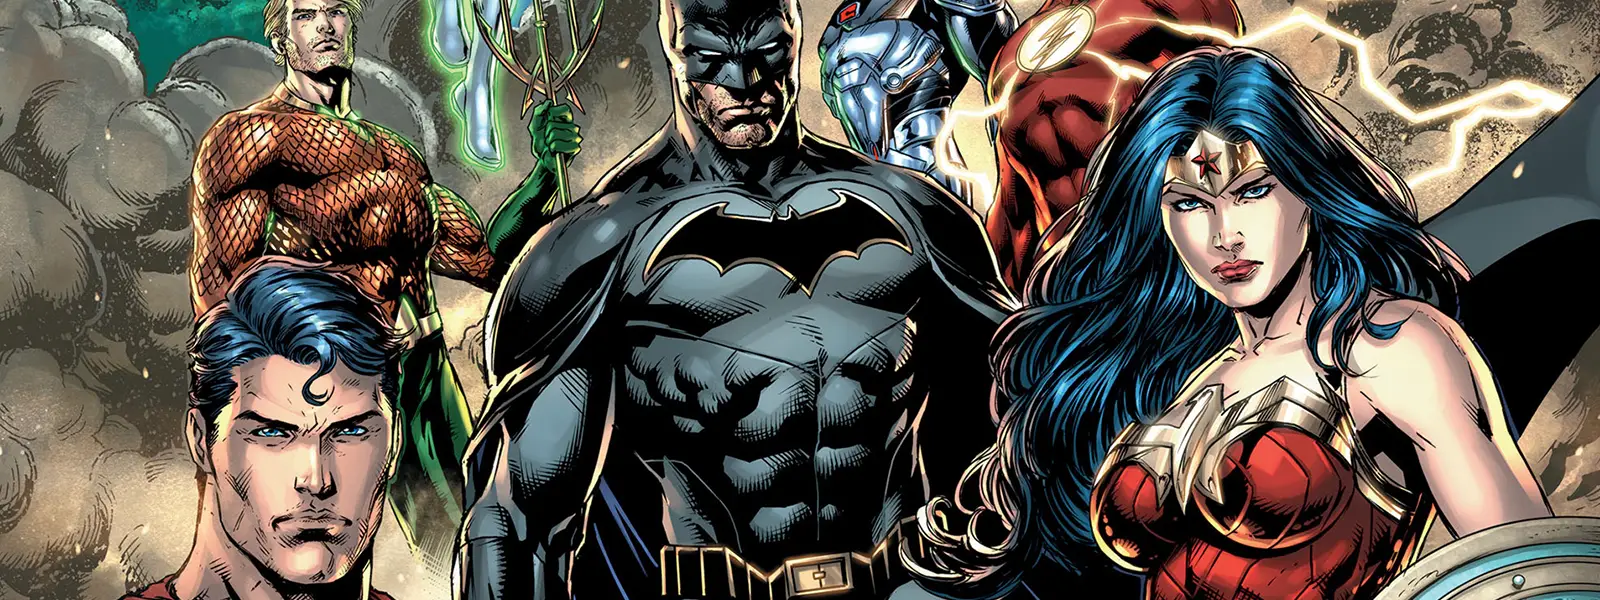 justice league reading order banner art